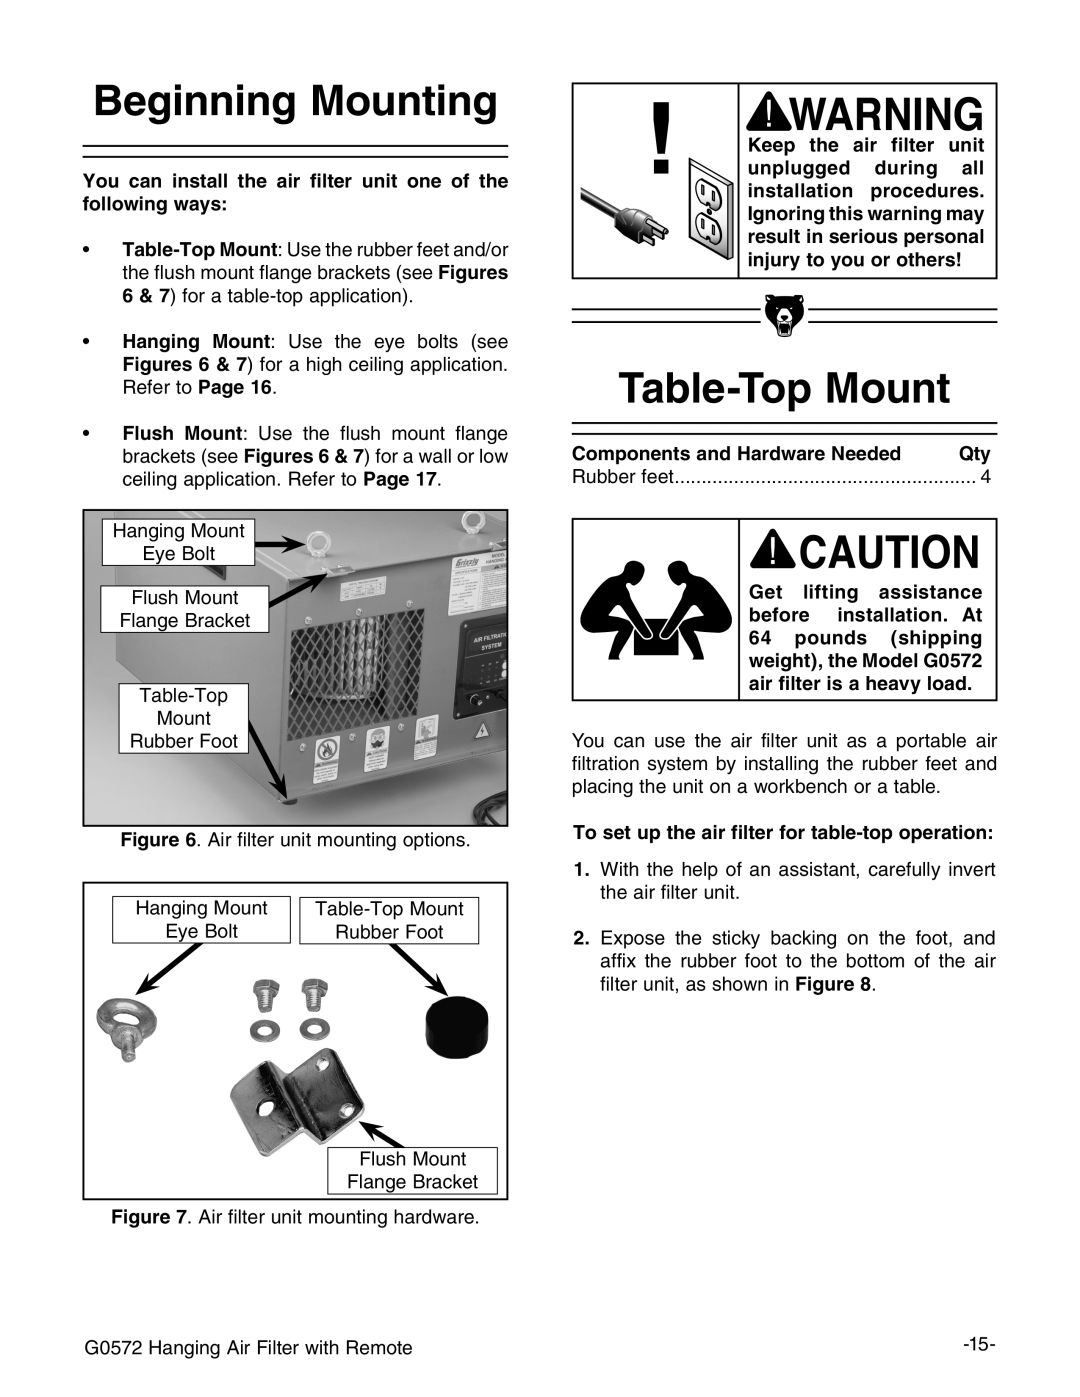 Grizzly G0572 instruction manual Beginning Mounting, Table-TopMount 